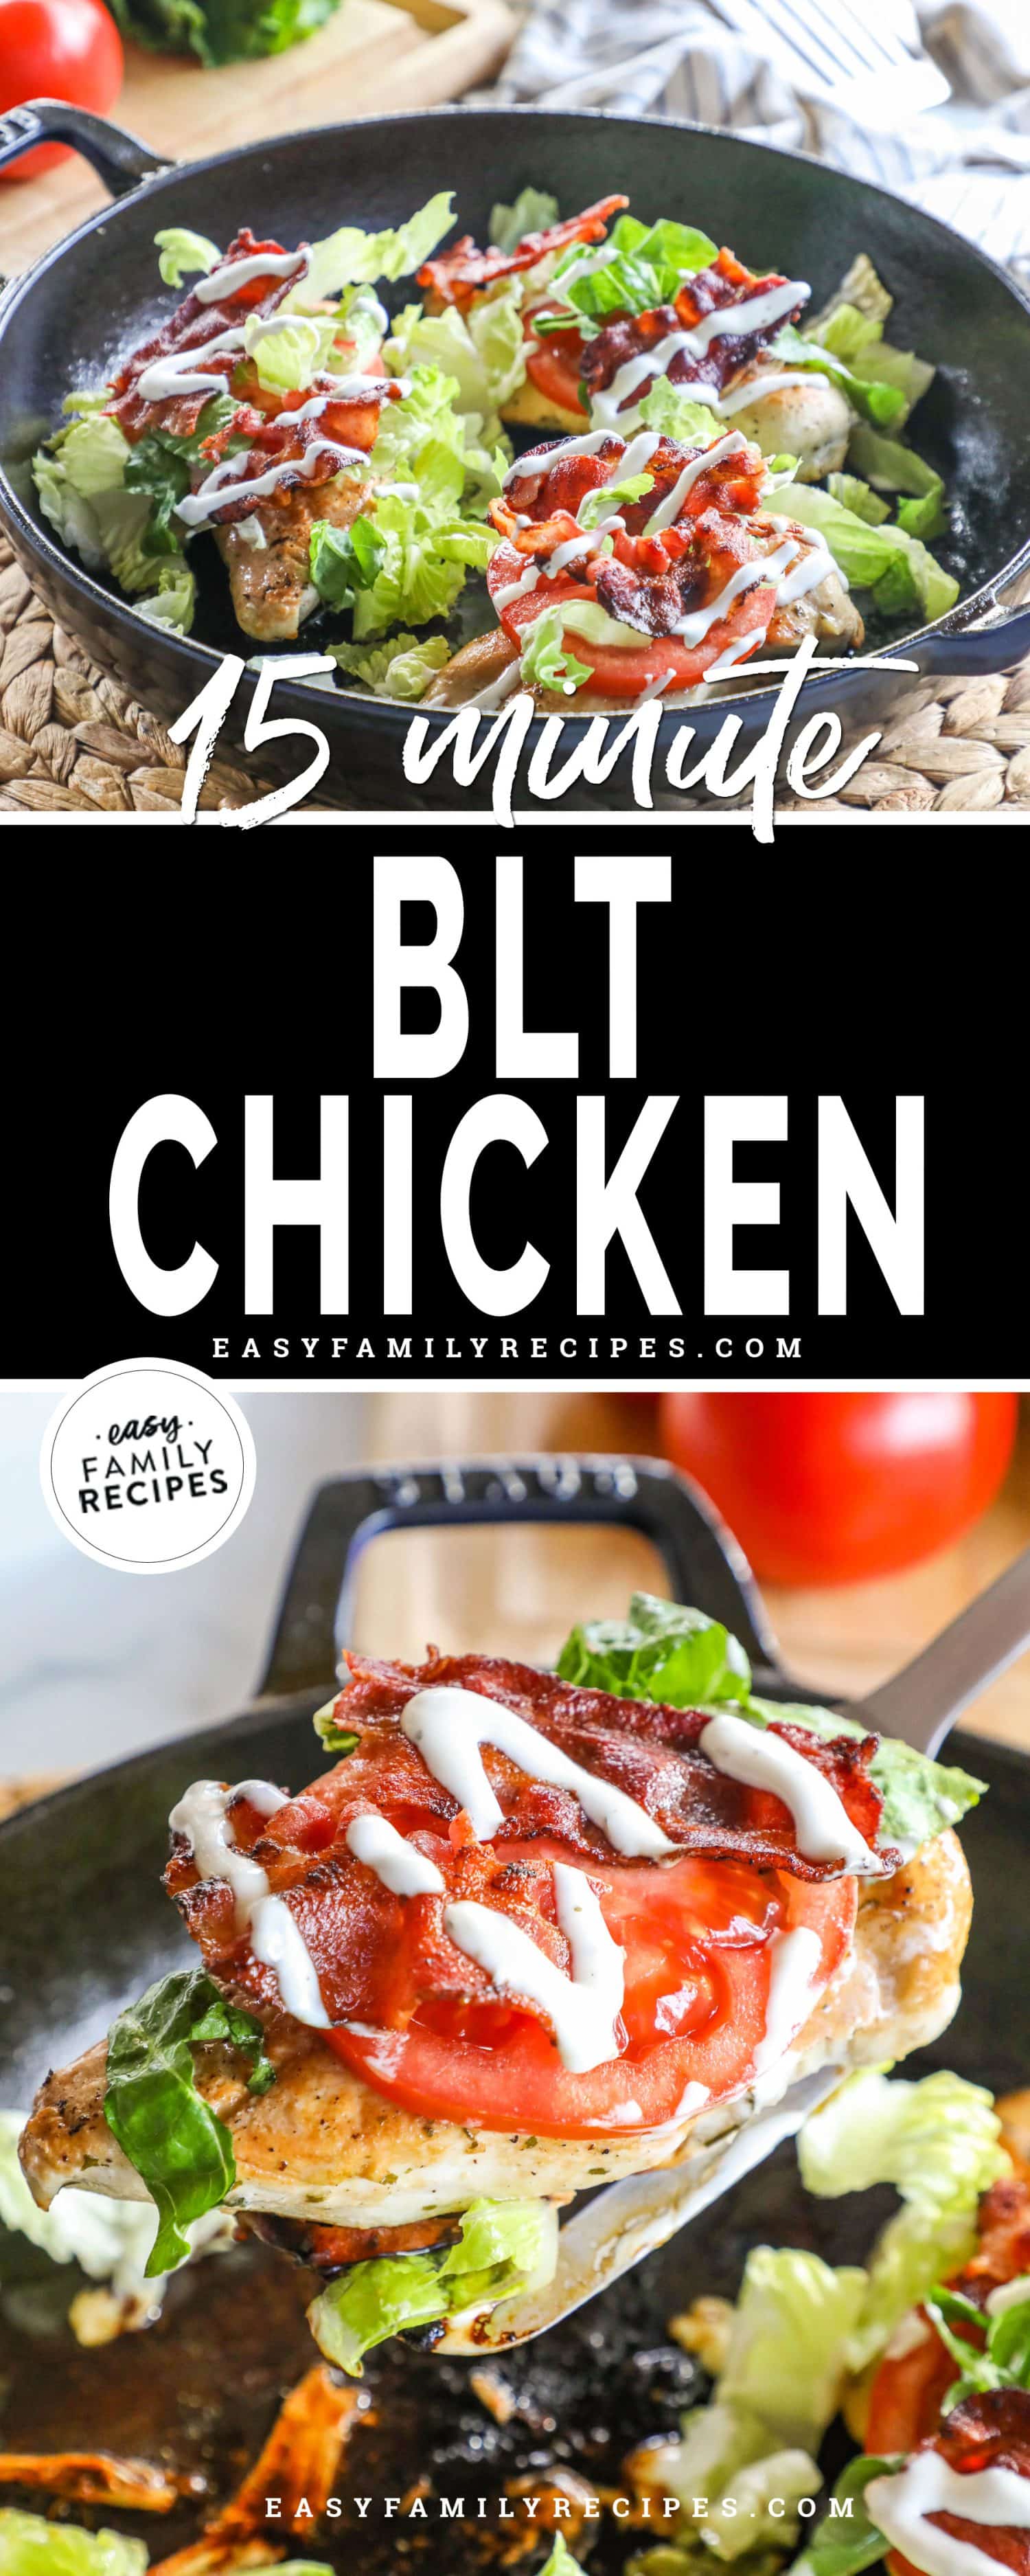 two images of BLT chicken, one with ingredients in a skillet and one with a loaded chicken breast being lifted out of the skillet.